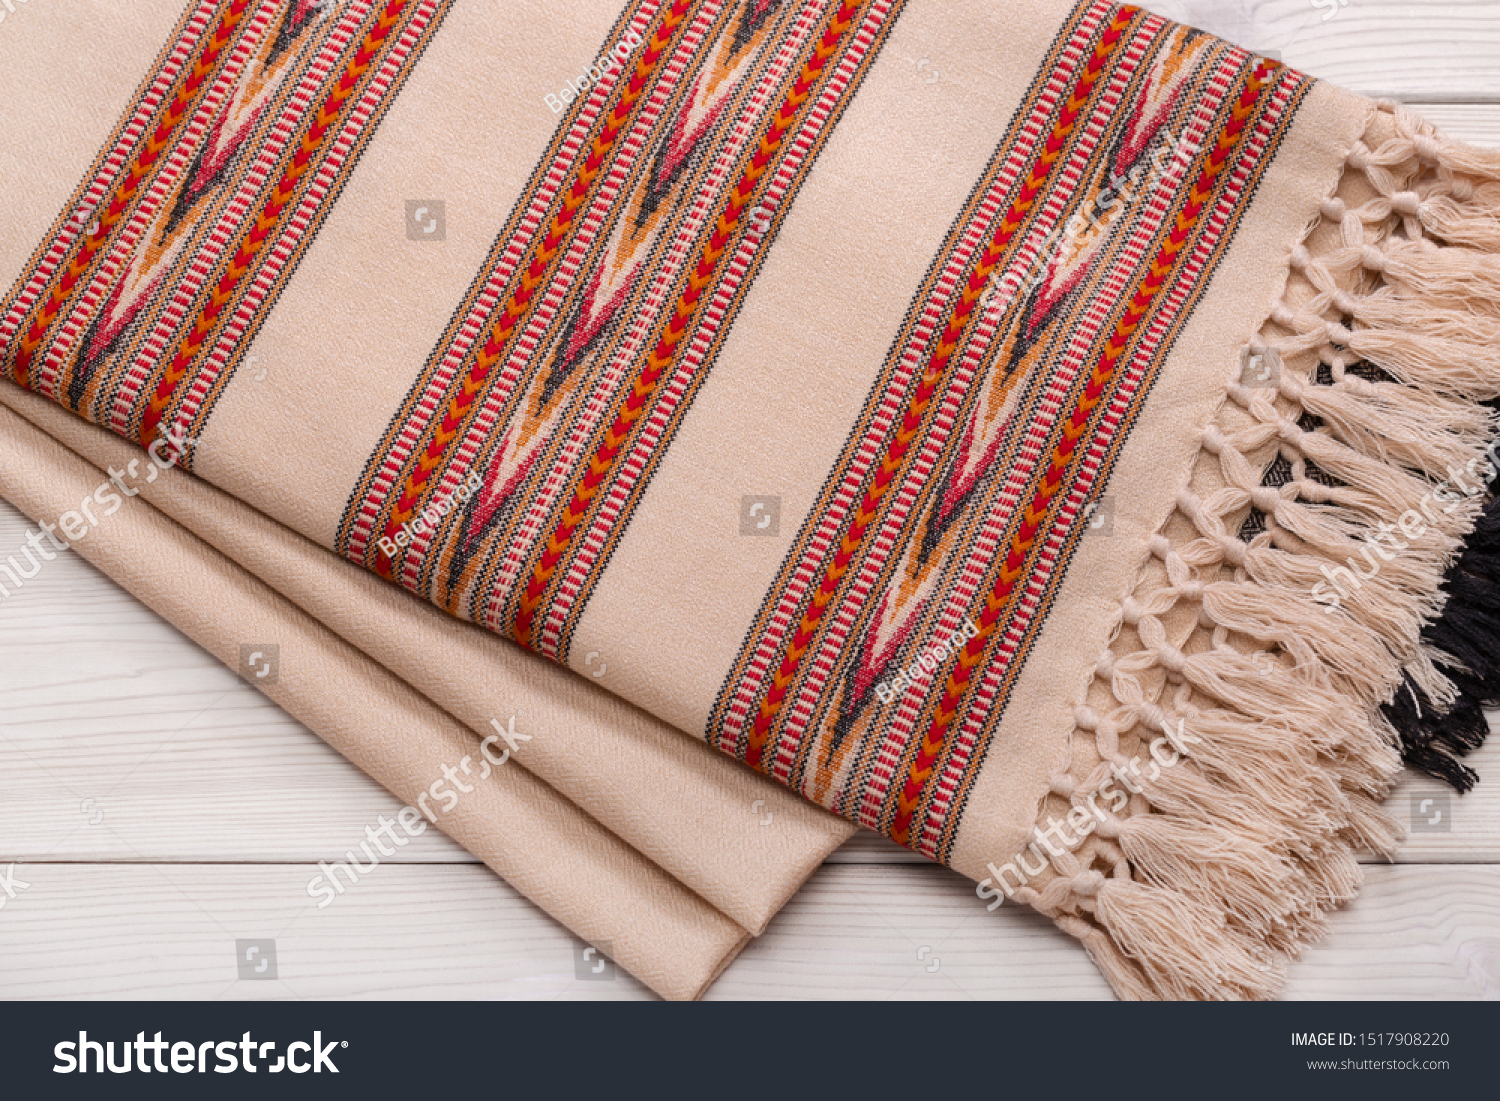  Warm woolen plaid on wooden background. Homeliness. Colorful plaids. #1517908220